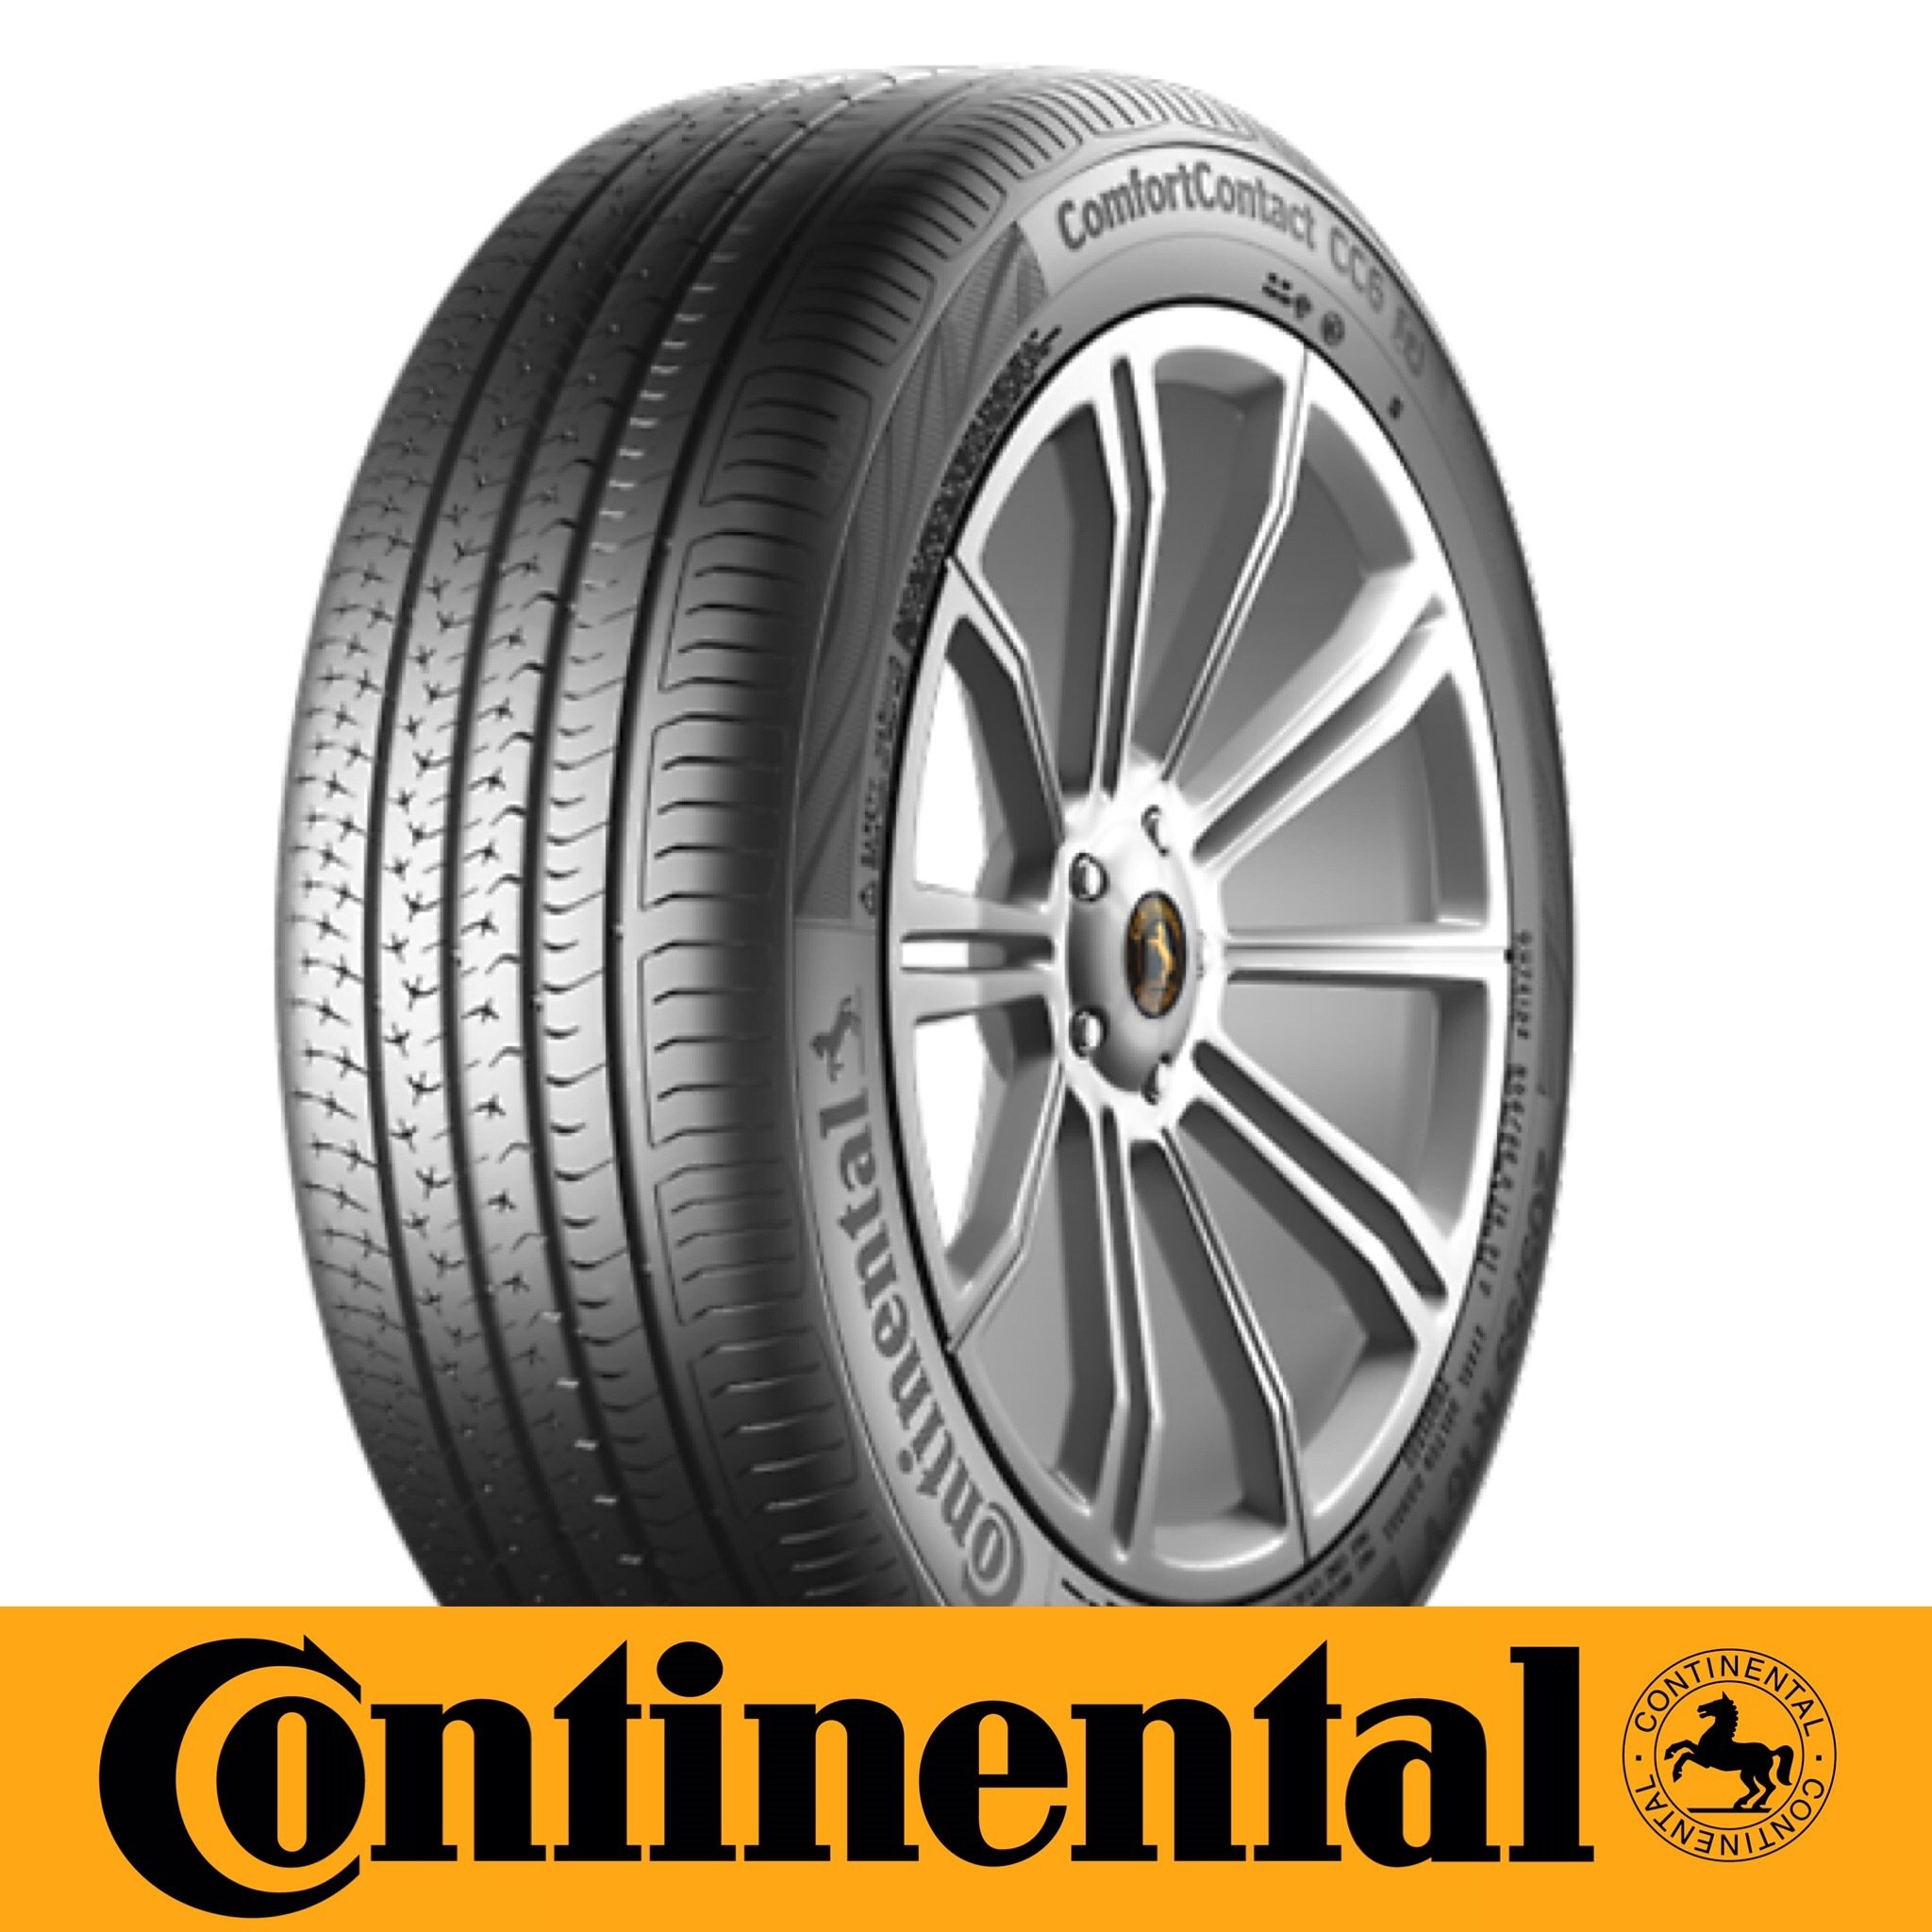 Continental ultracontact uc6. Continental COMFORTCONTACT 6. Continental COMFORTCONTACT 1. Continental ULTRACONTACT. Continental ULTRACONTACT 195/50 r15.